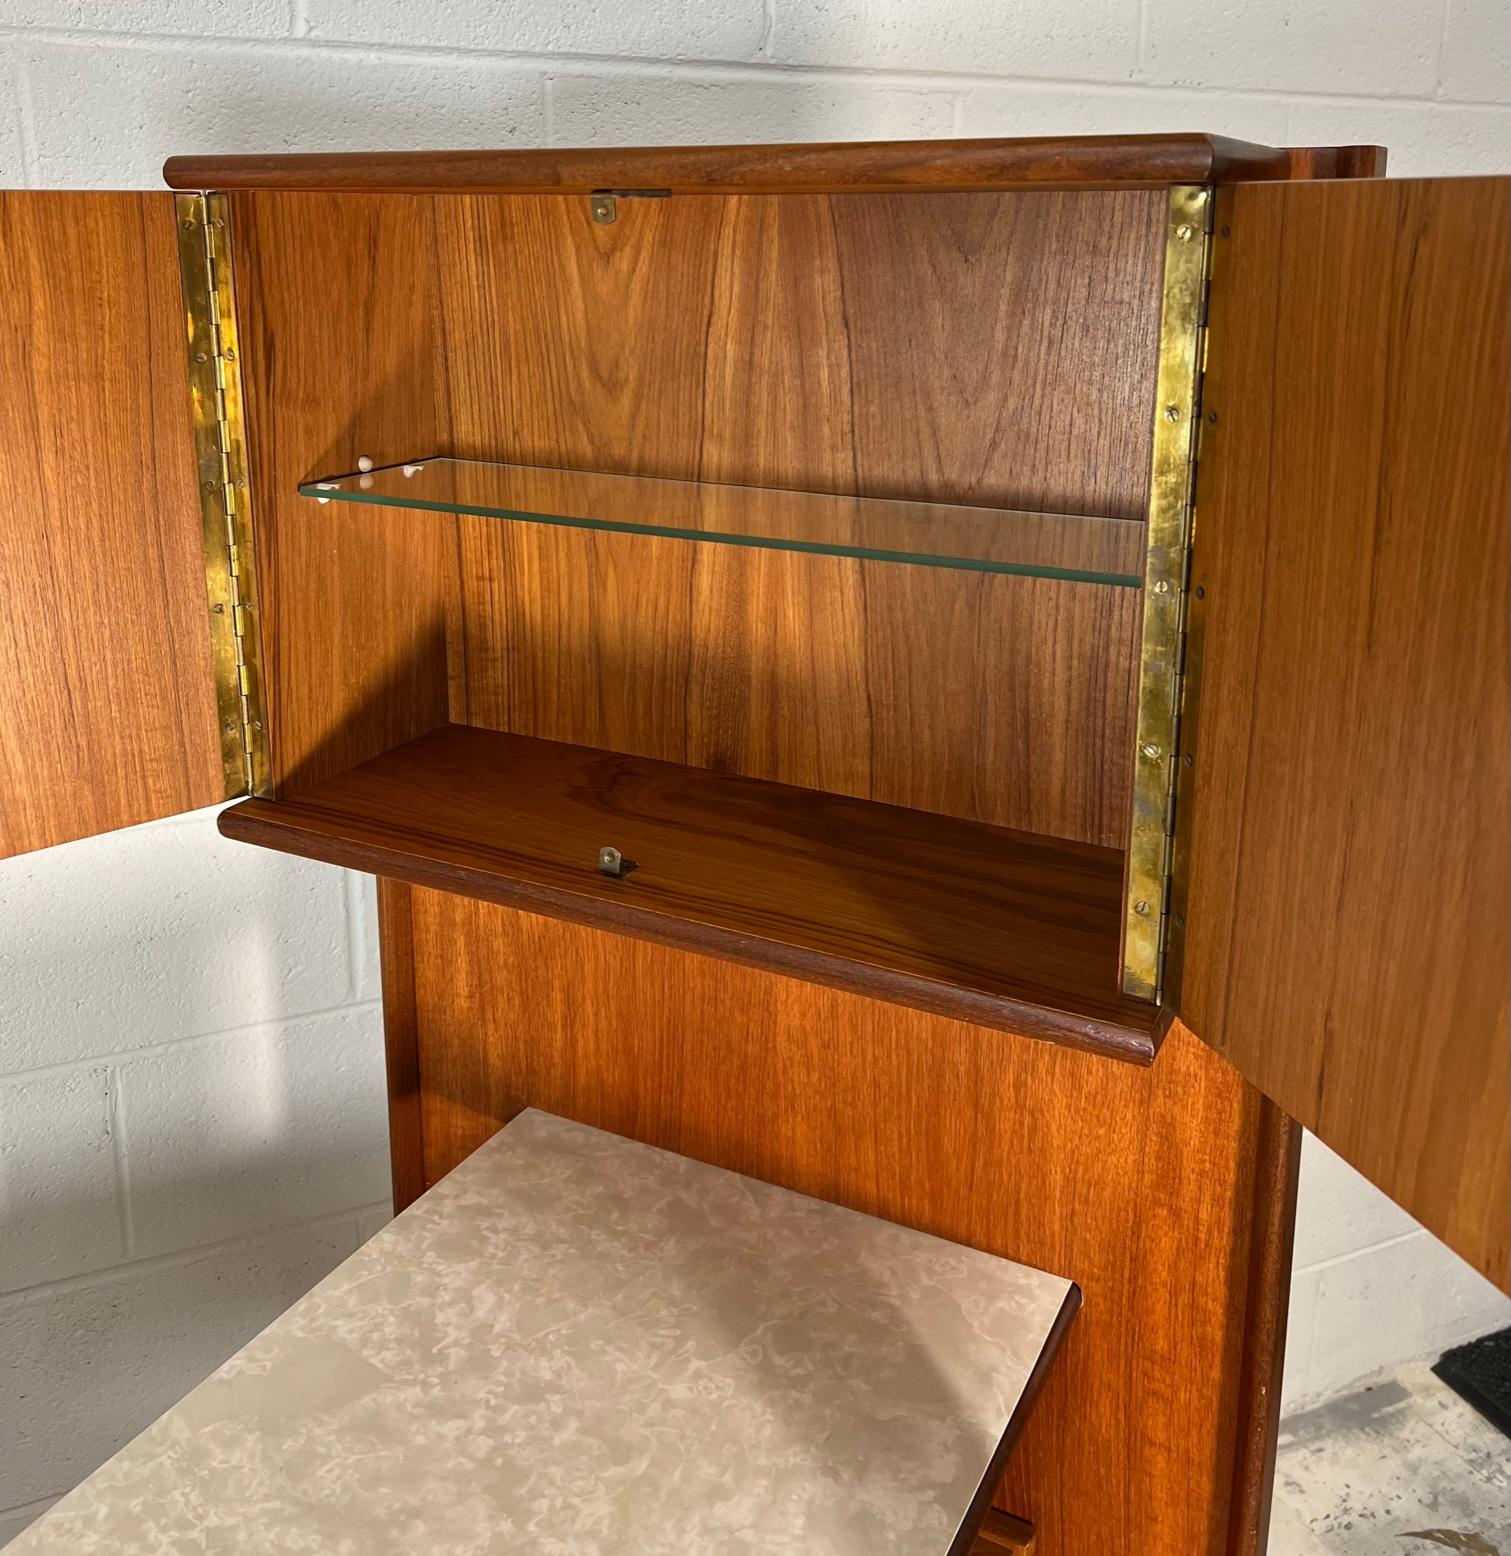 British Mid Century Modern Teak Cocktail Home Dry Bar With Side Panel By Turnidge